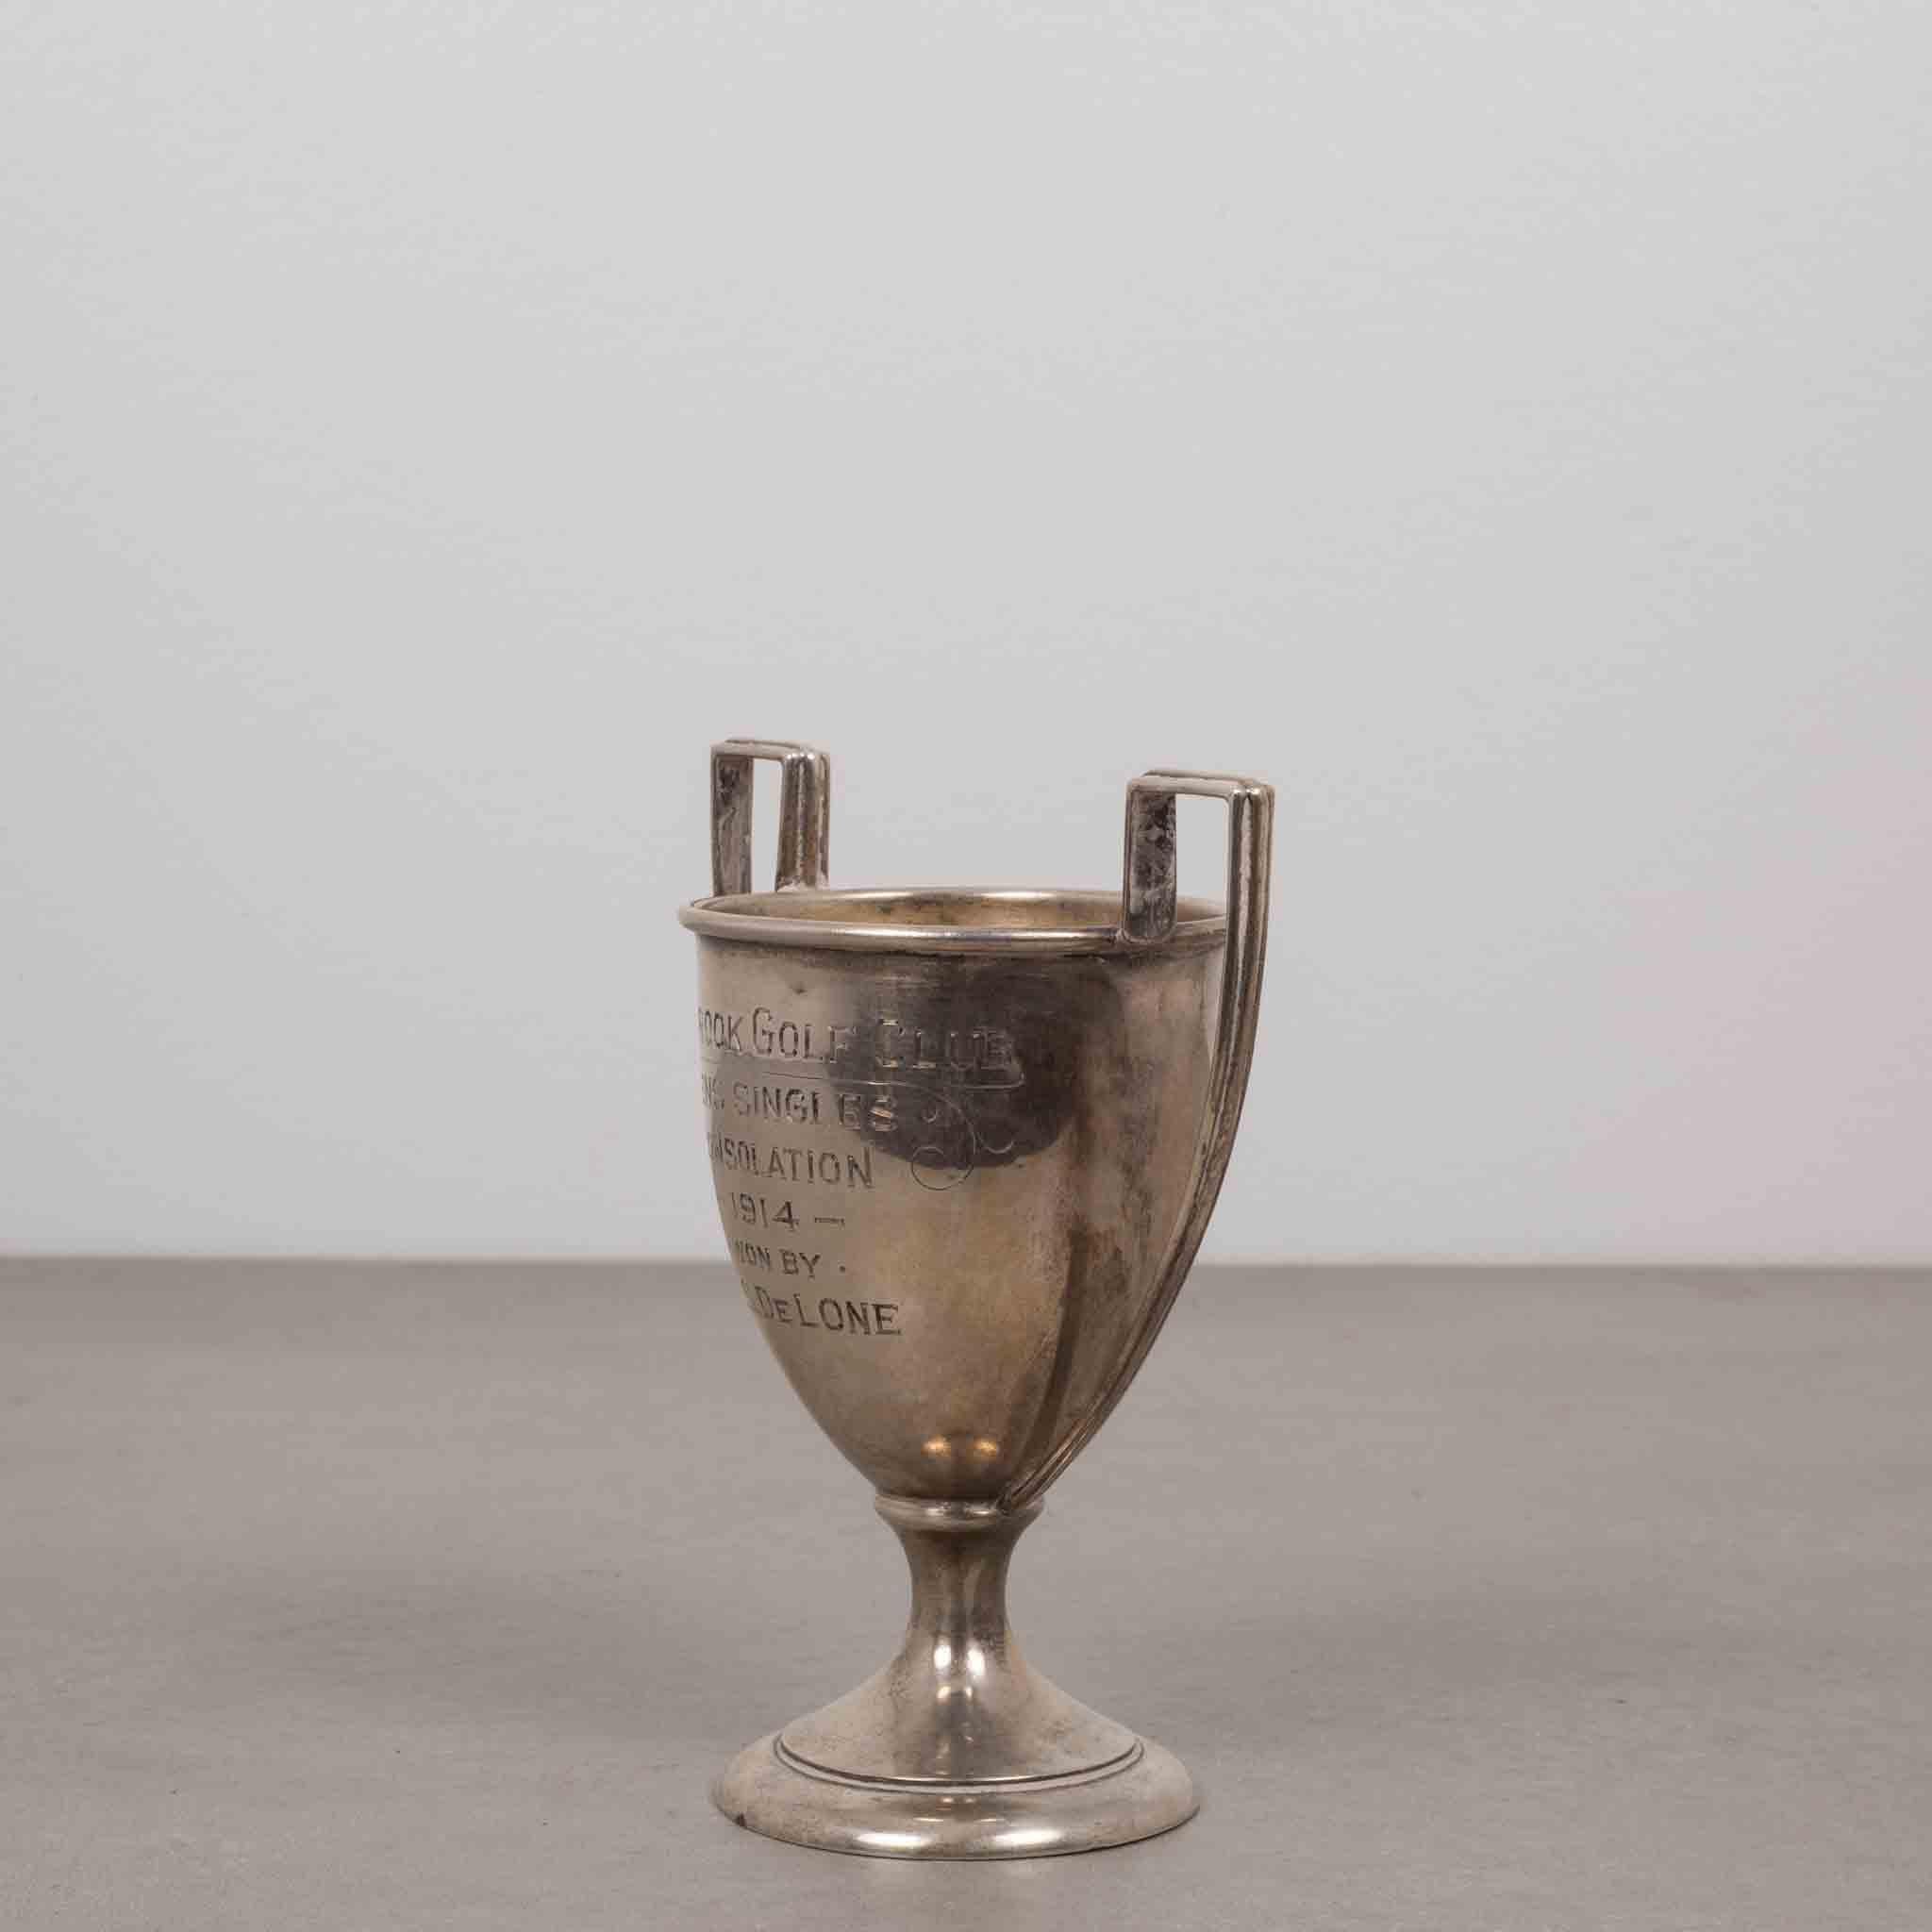 ABOUT
This is an original sterling silver loving cup with the inscription: 